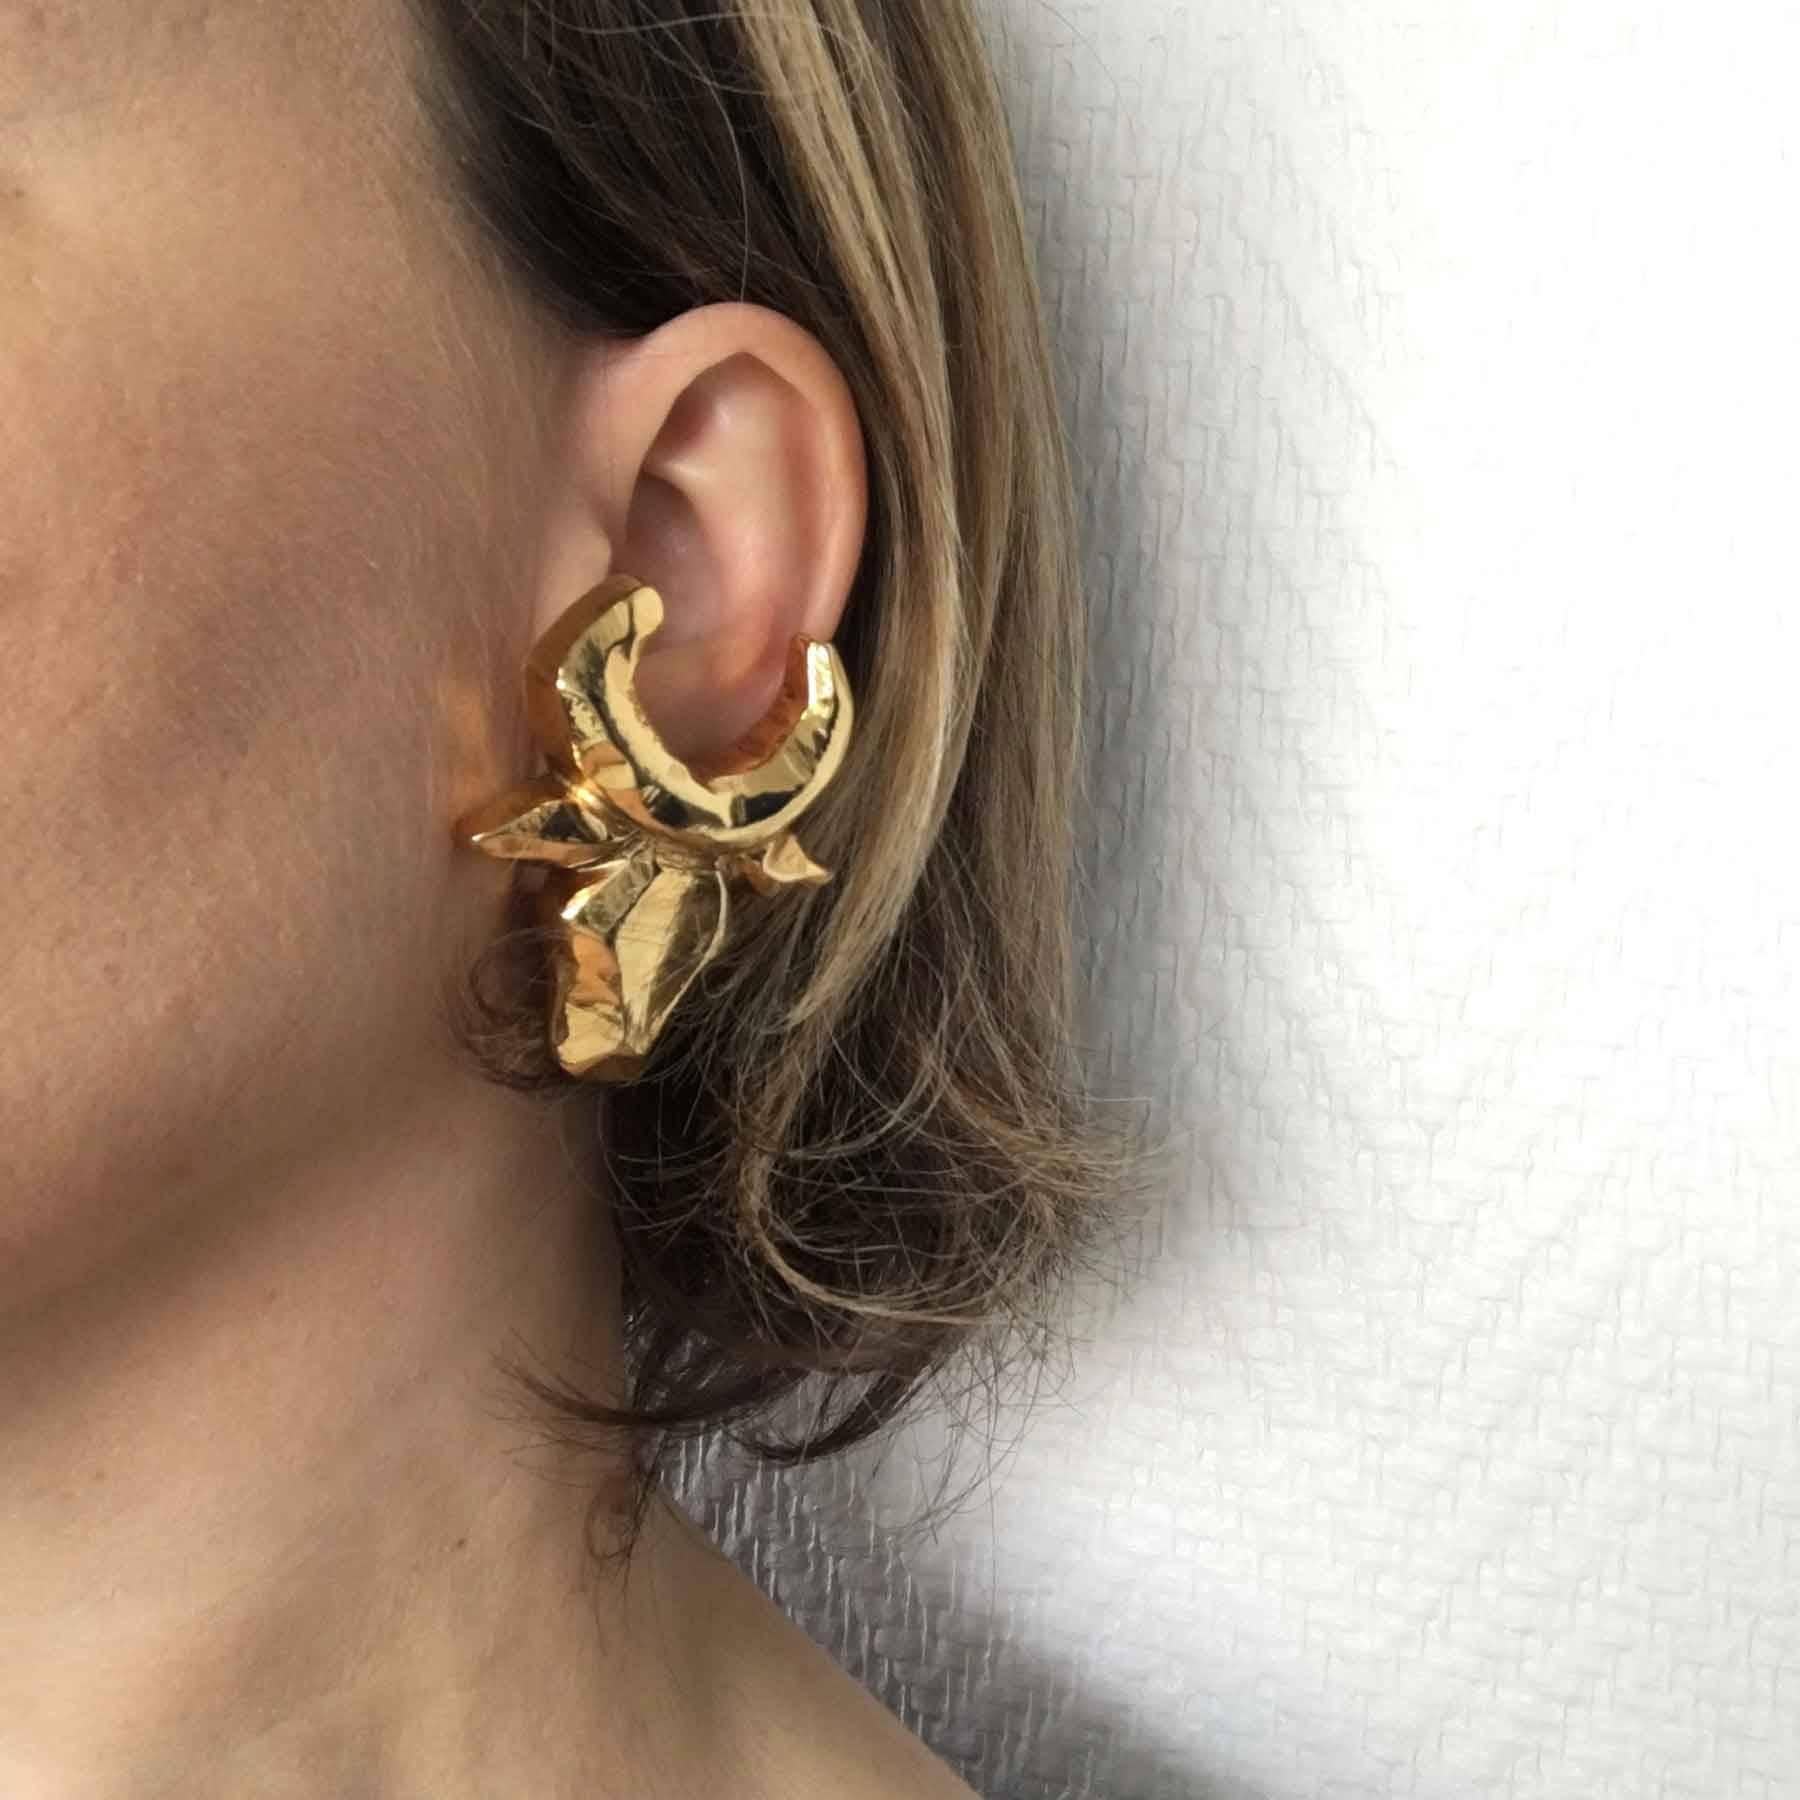 Christian Lacroix clip-on earrings bull head in gilded metal.

In very good shape.

Dimensions: 5.5x4.6 cm

Will be delivered in a new, non-original dust bag